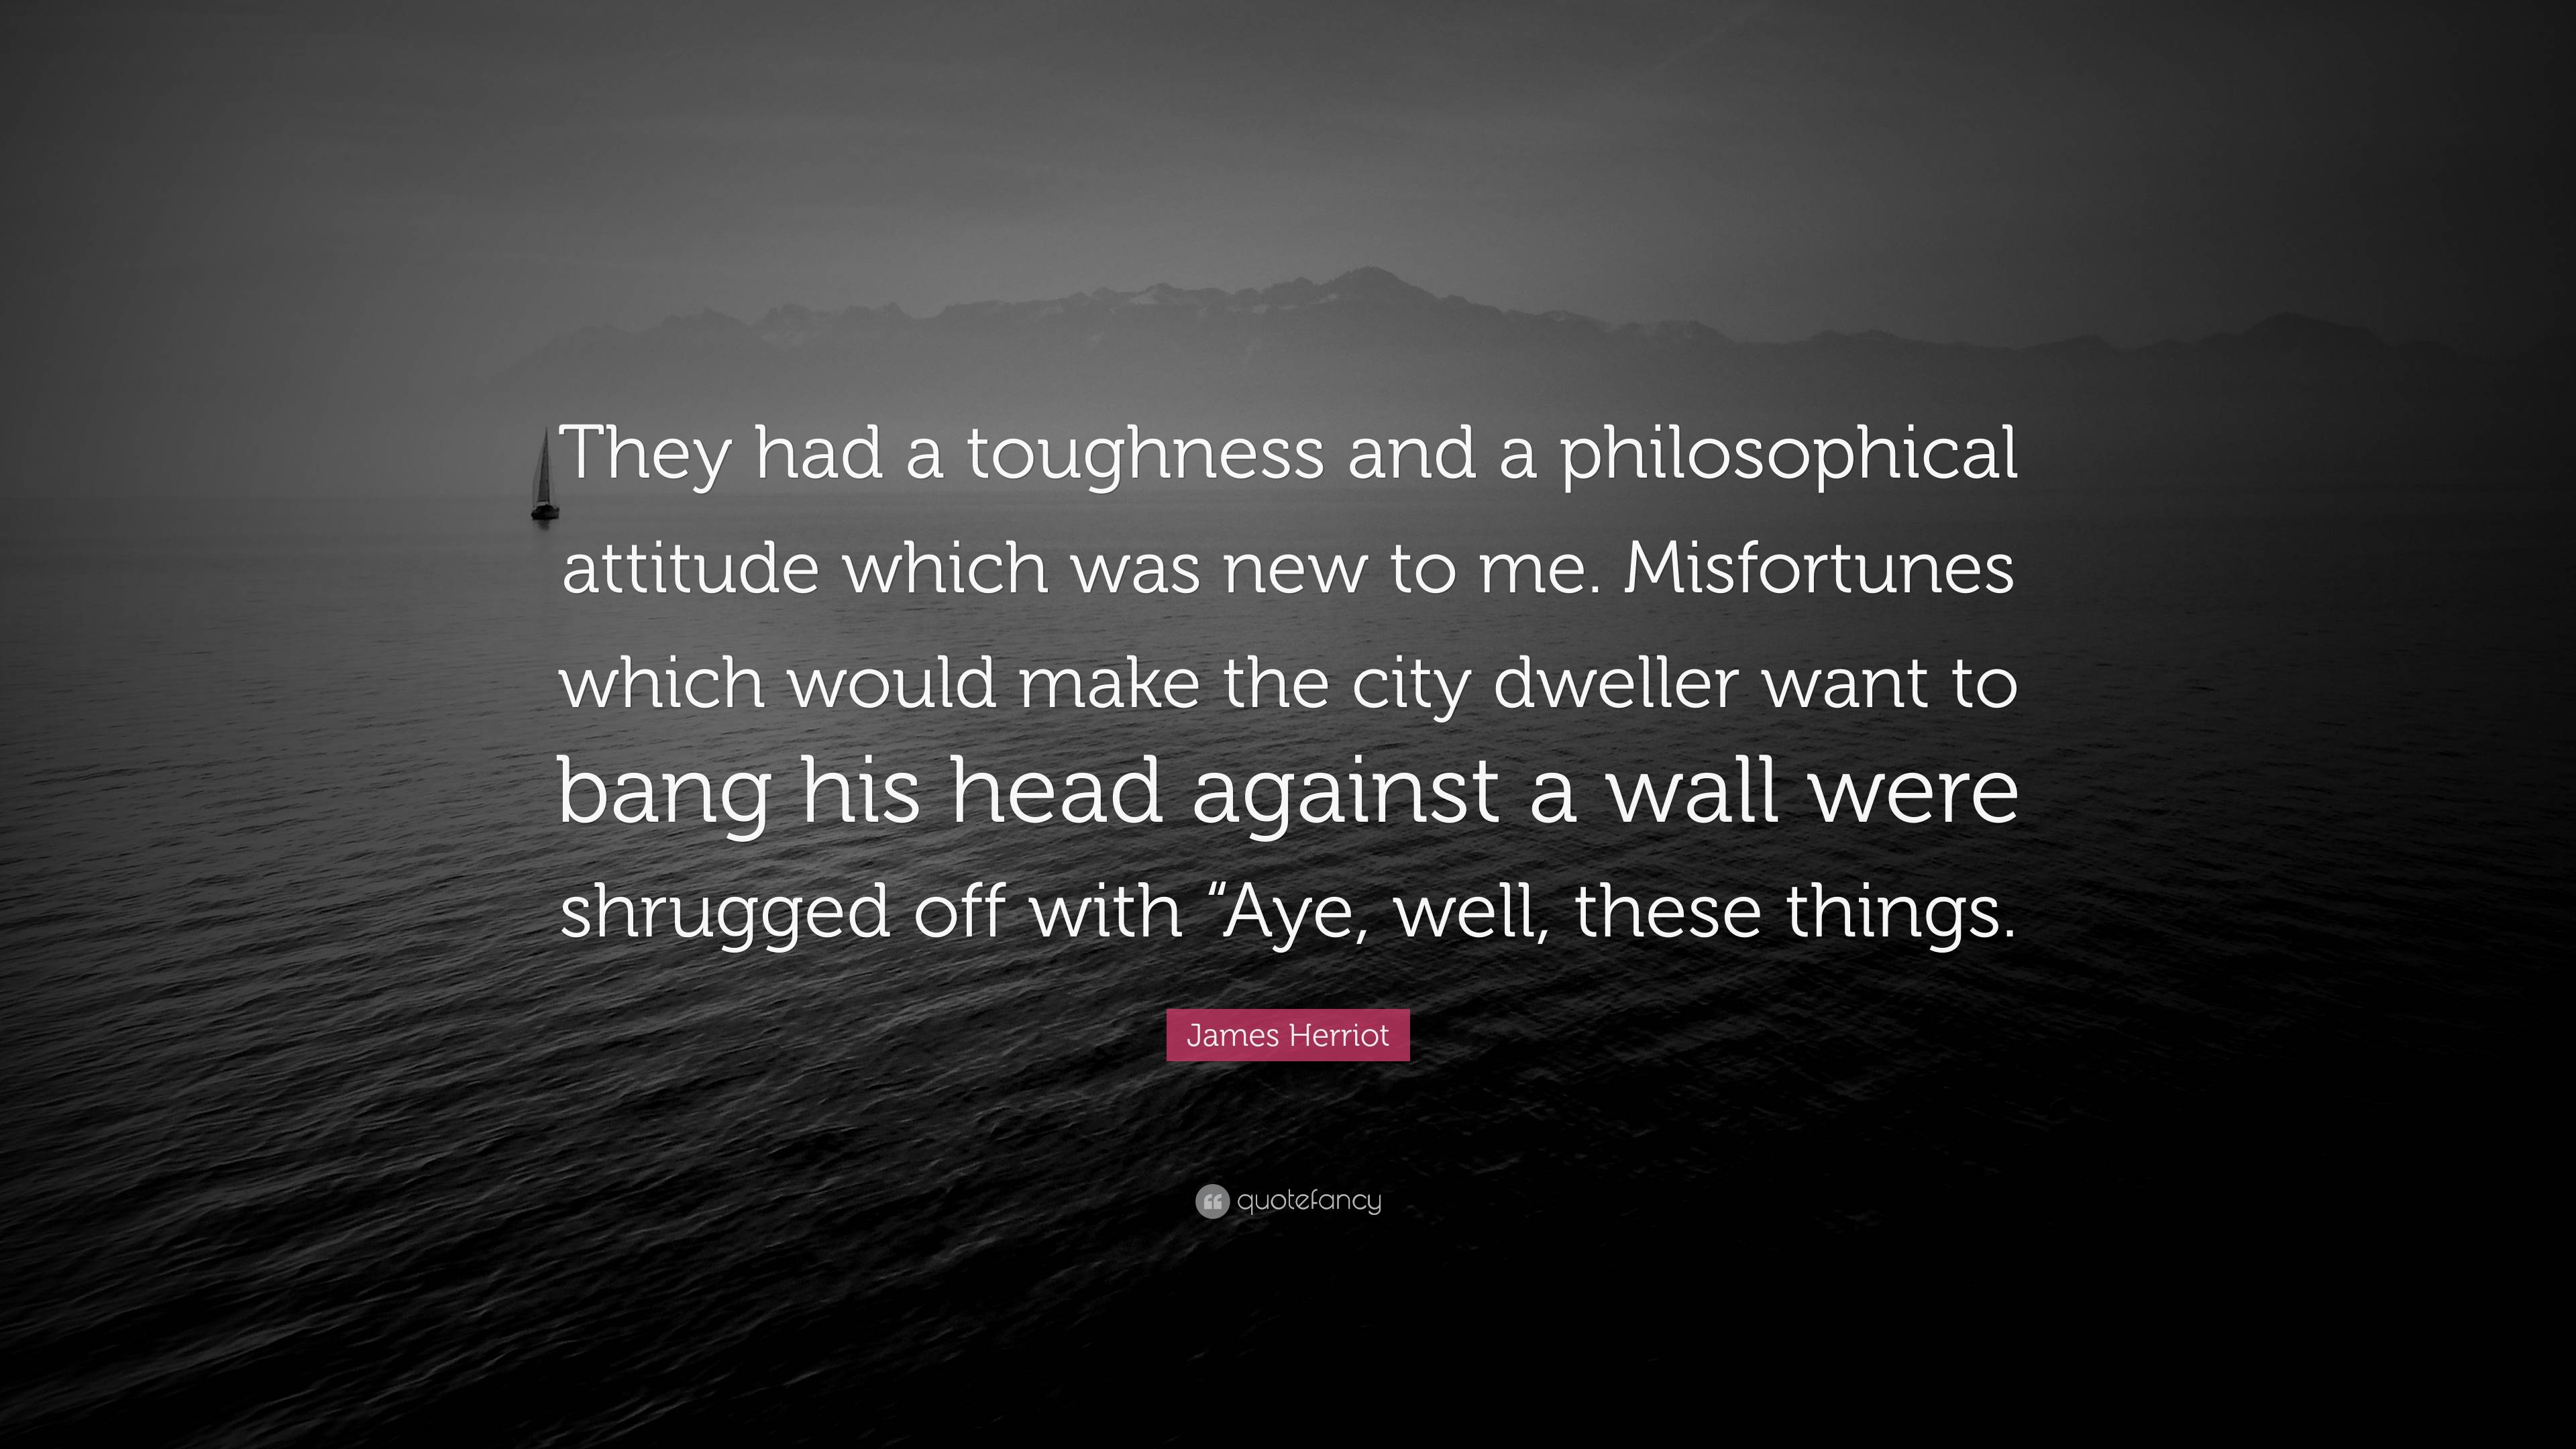 James Herriot Quote: “They had a toughness and a philosophical attitude ...